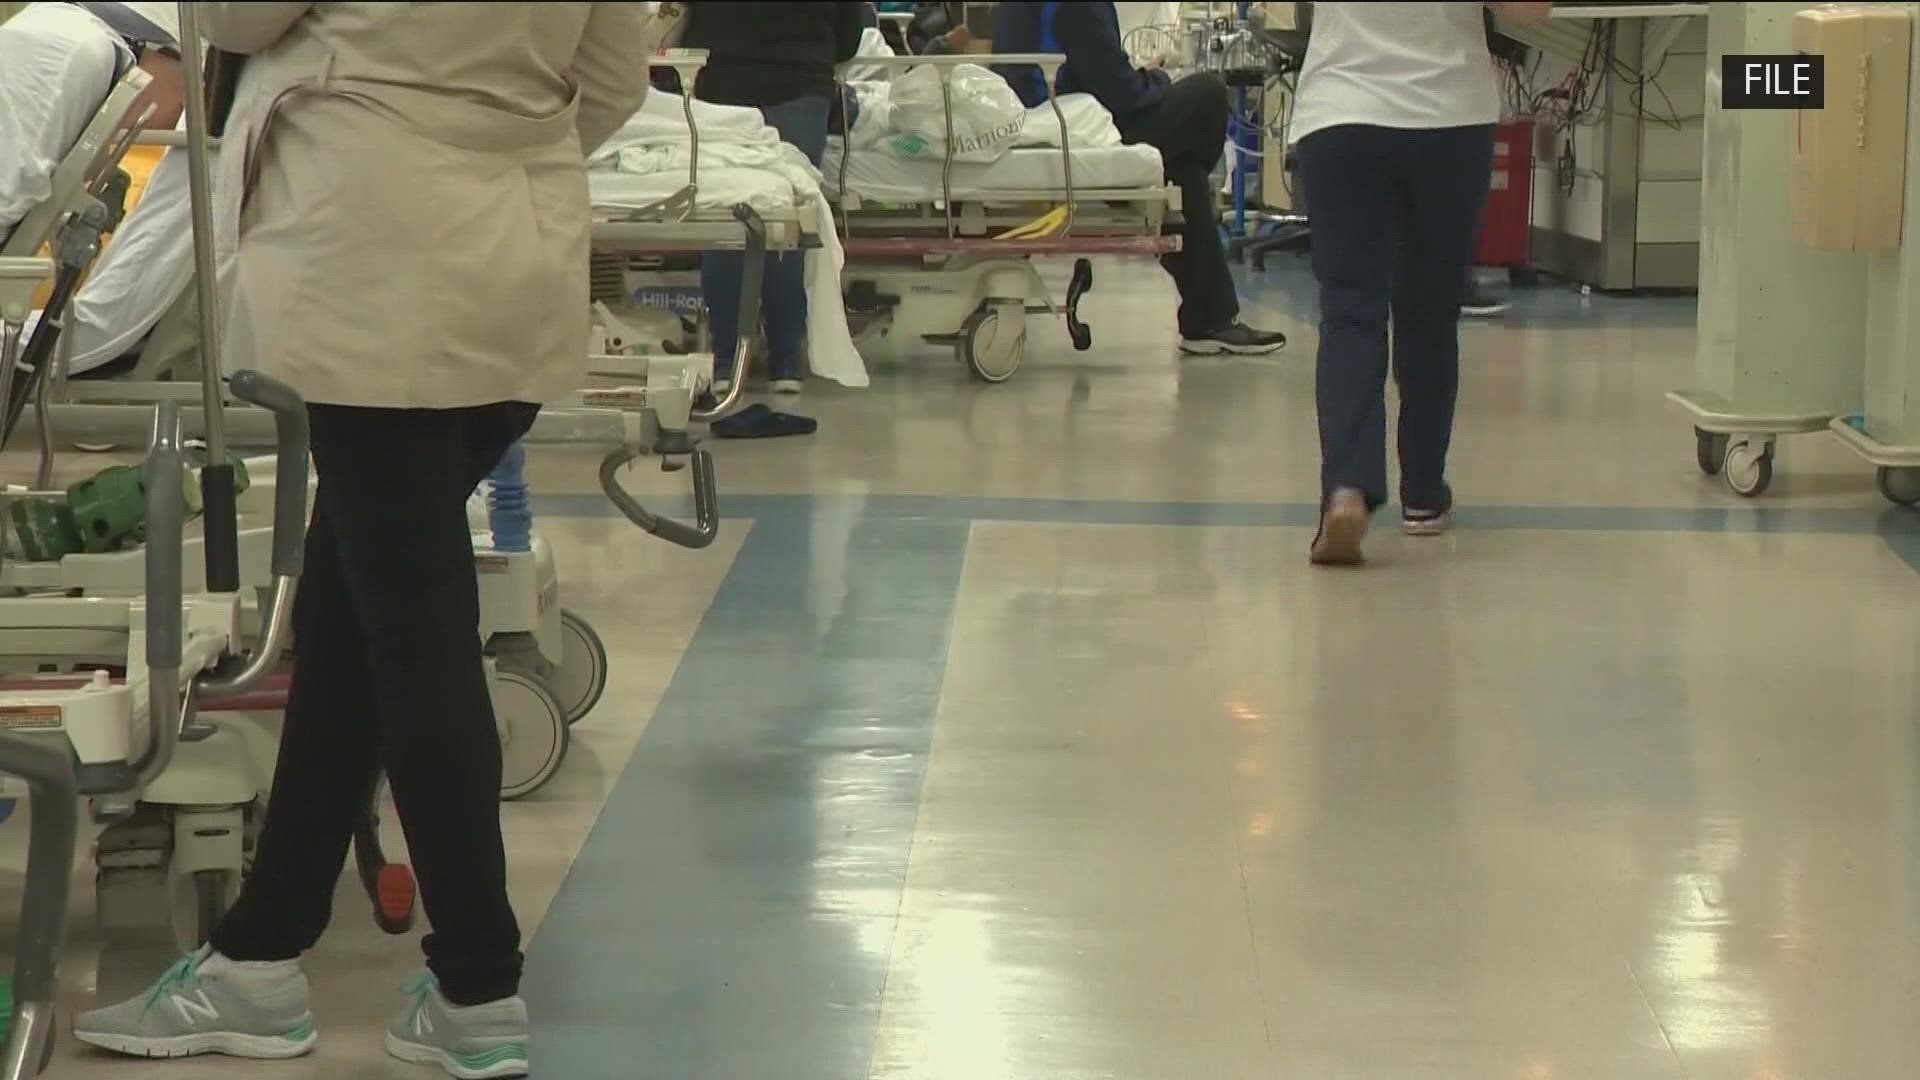 Our Kristy Gerlett explains what doctors are saying about the recent surge in hospital visits in our area.